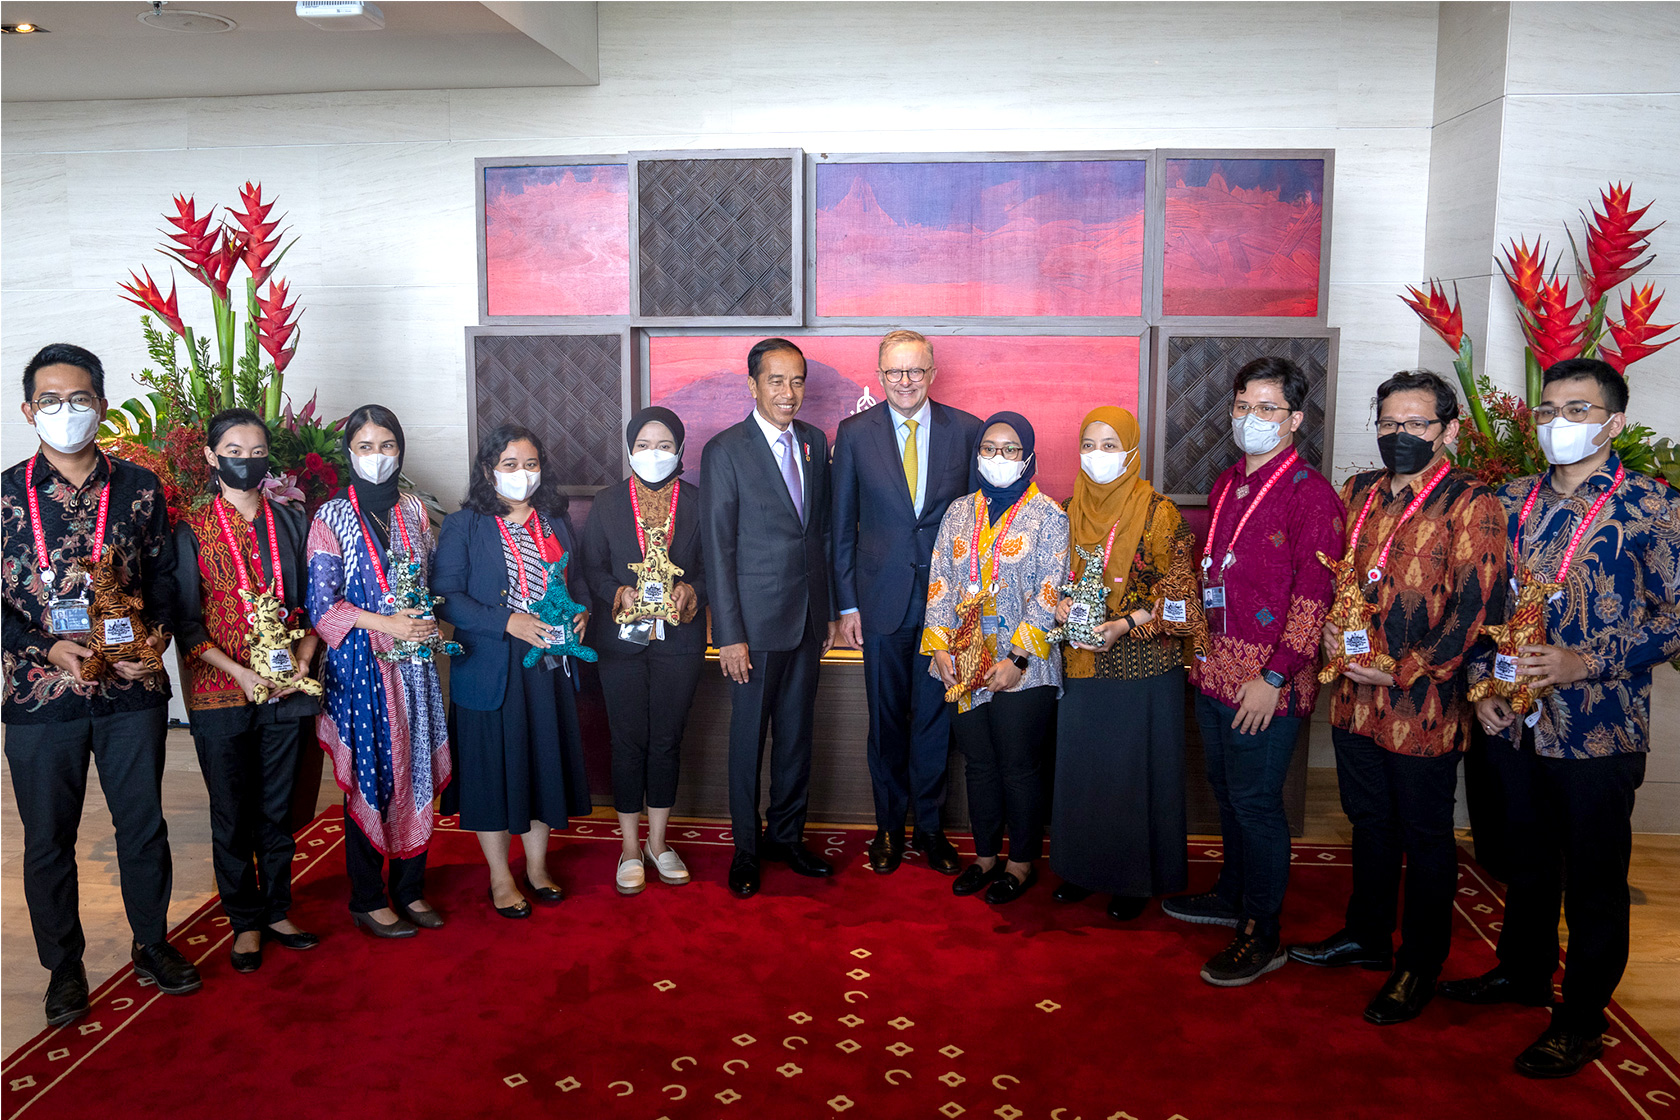 The recipients of G20 “Recover Together, Recover Stronger” Scholarships” take a picture with President of Indonesia and the Prime Minister of Australia